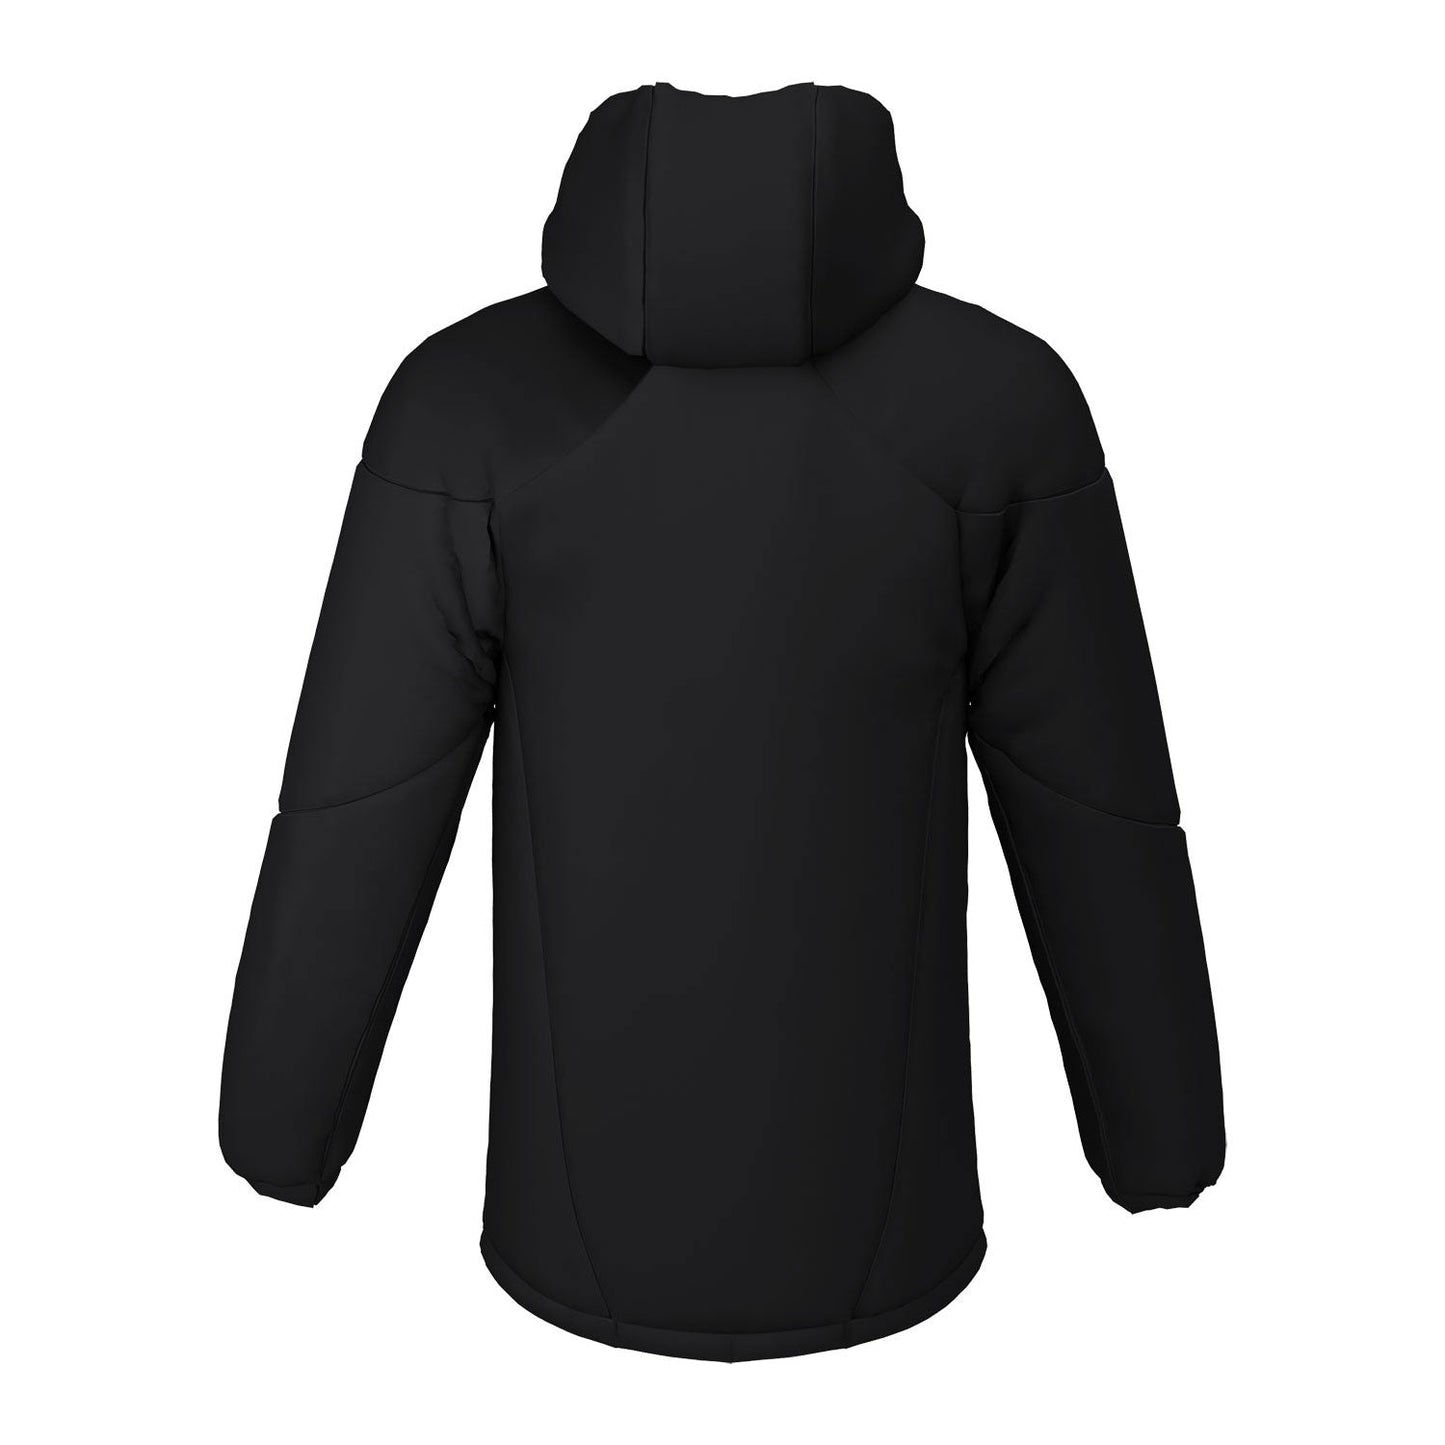 Lucy Cavendish College Boat Club Contoured Thermal Jacket